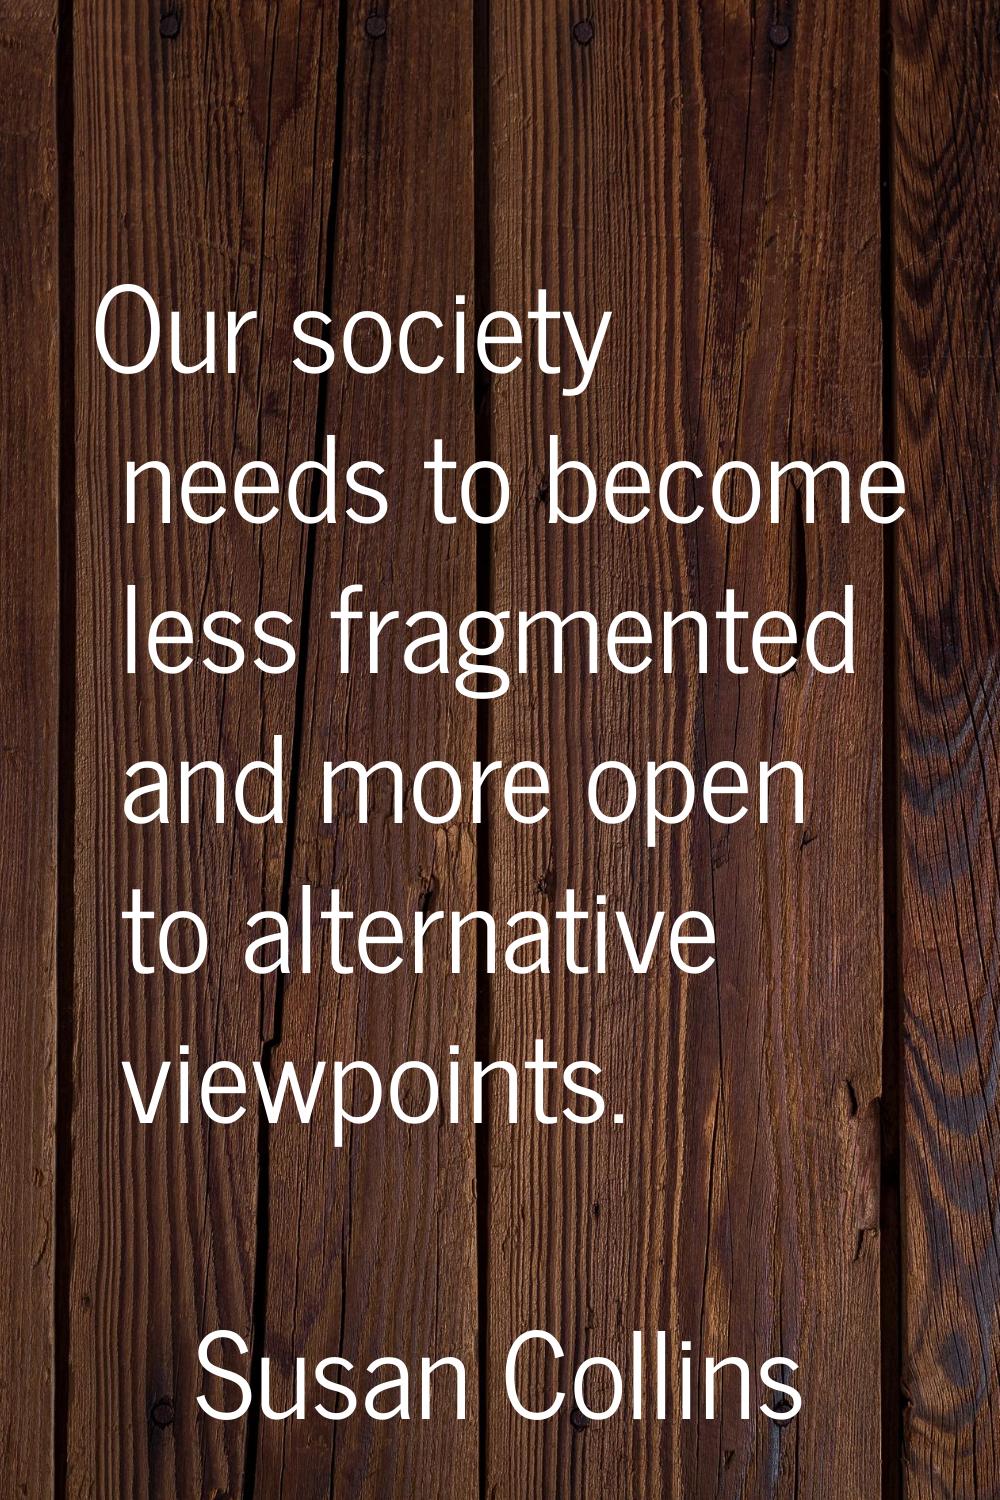 Our society needs to become less fragmented and more open to alternative viewpoints.